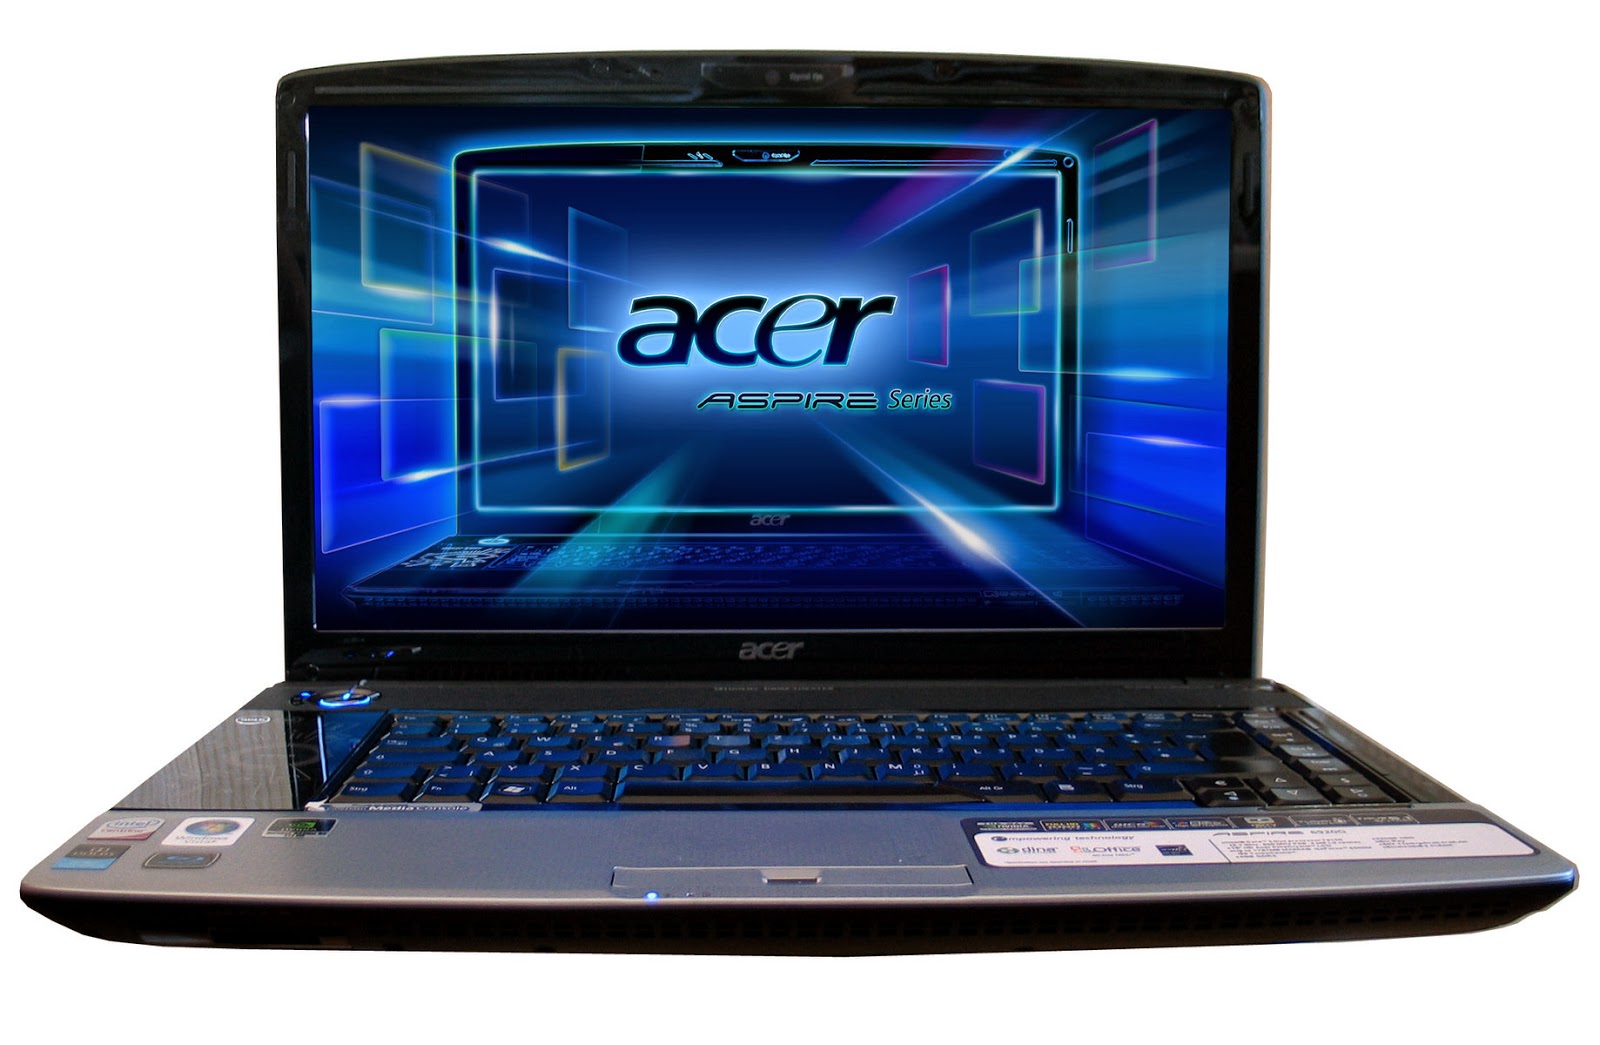 acer aspire one zg8 drivers for windows xp free download